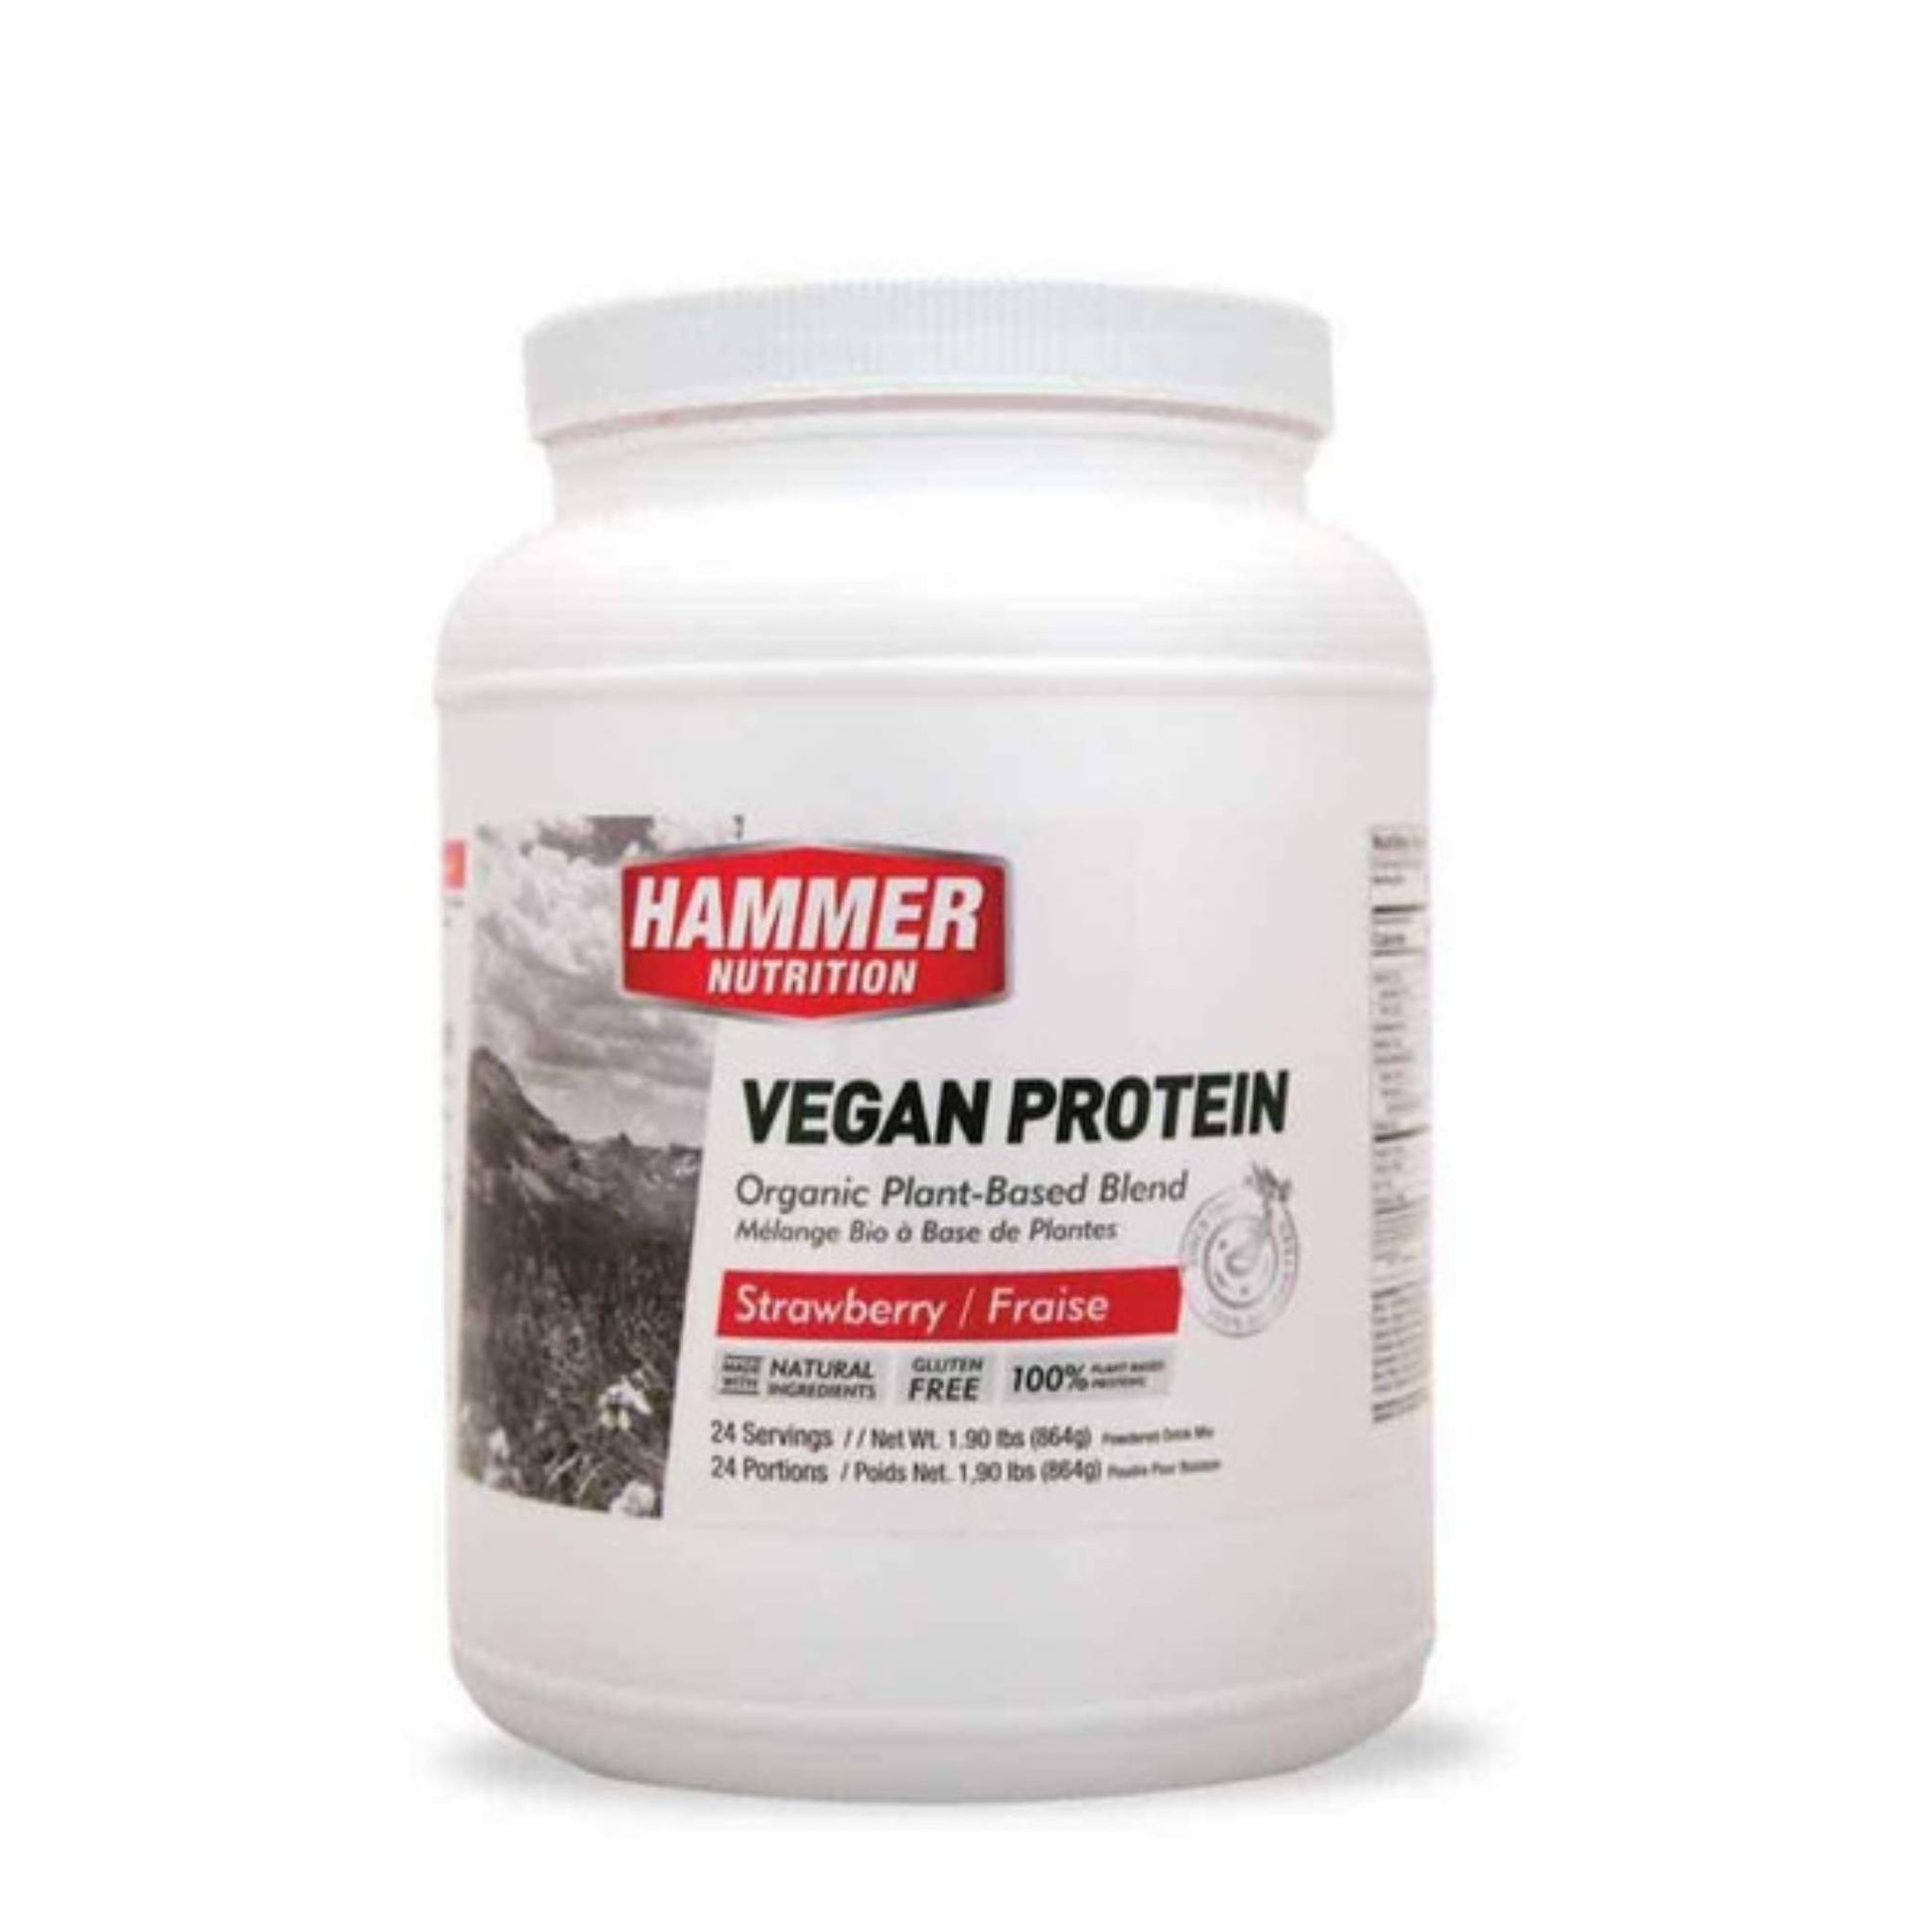 Hammer Nutrition - Vegan Protein, Strawberry, 24 Servings, Team Perfect